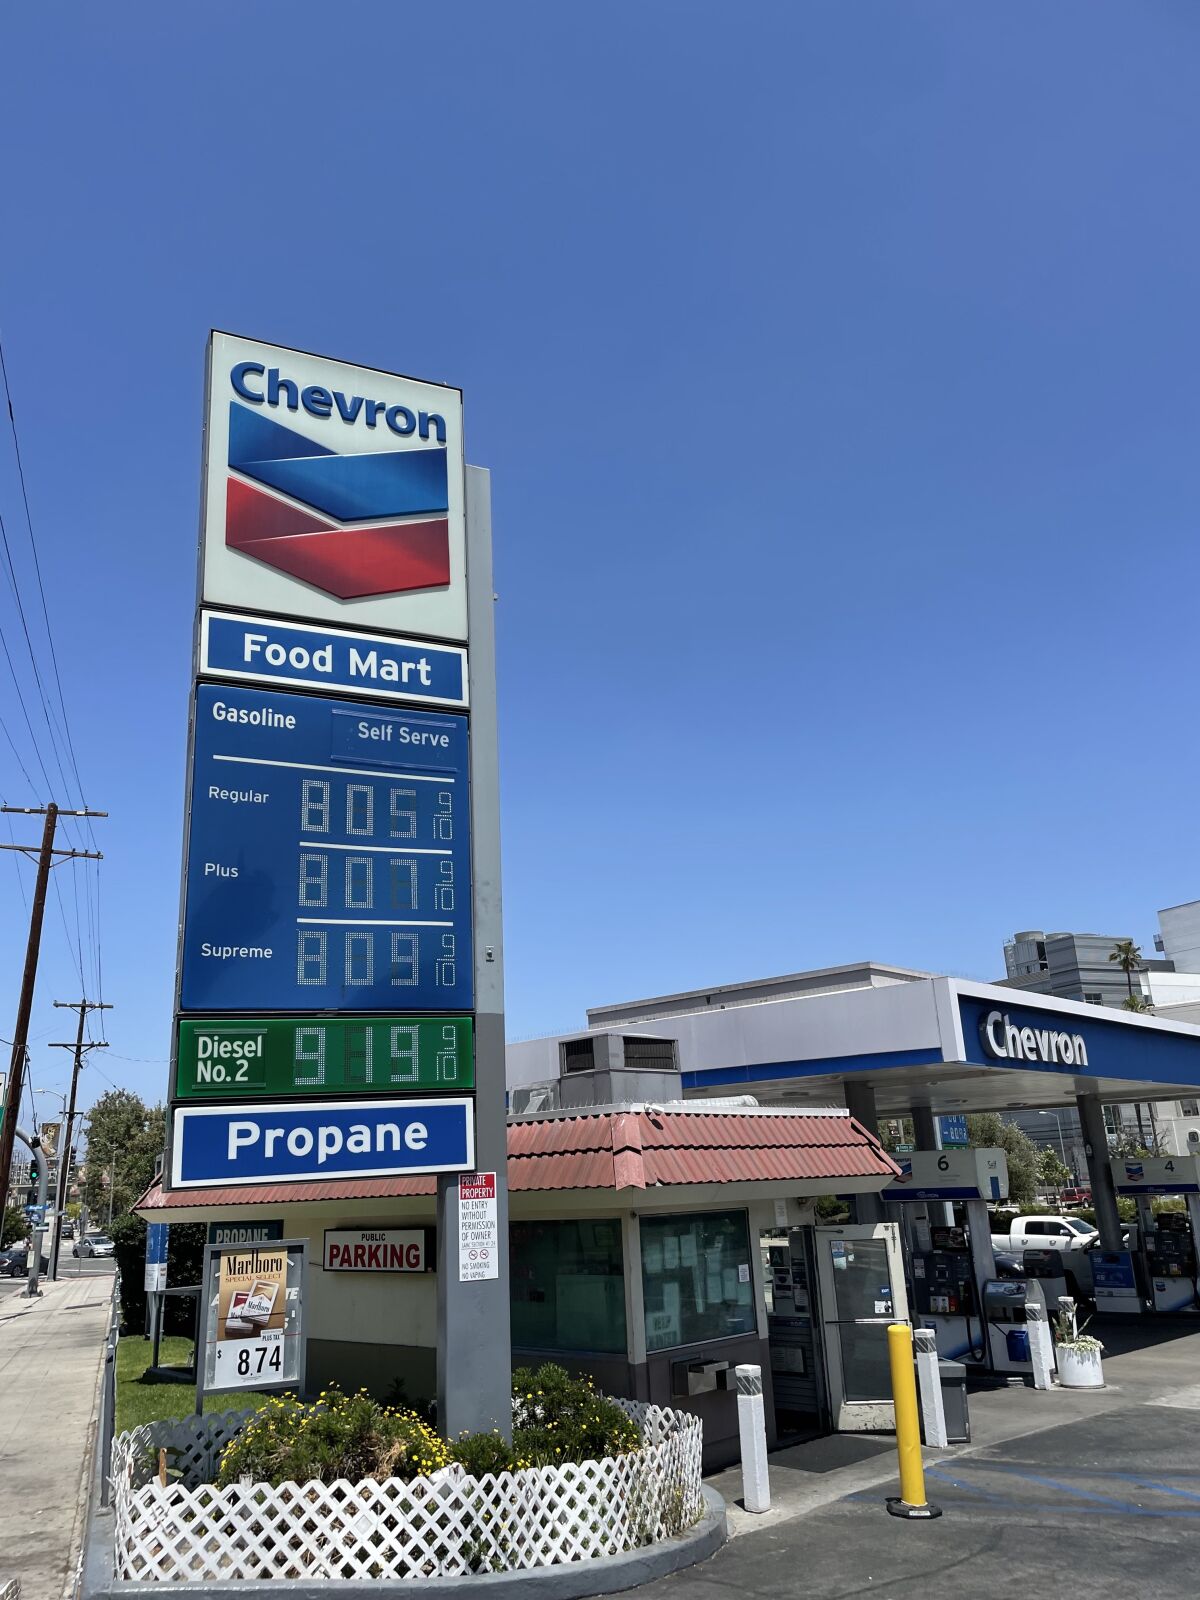 Advertisement for above $8 a gallon at Chevron gas station in downtown Los Angeles.